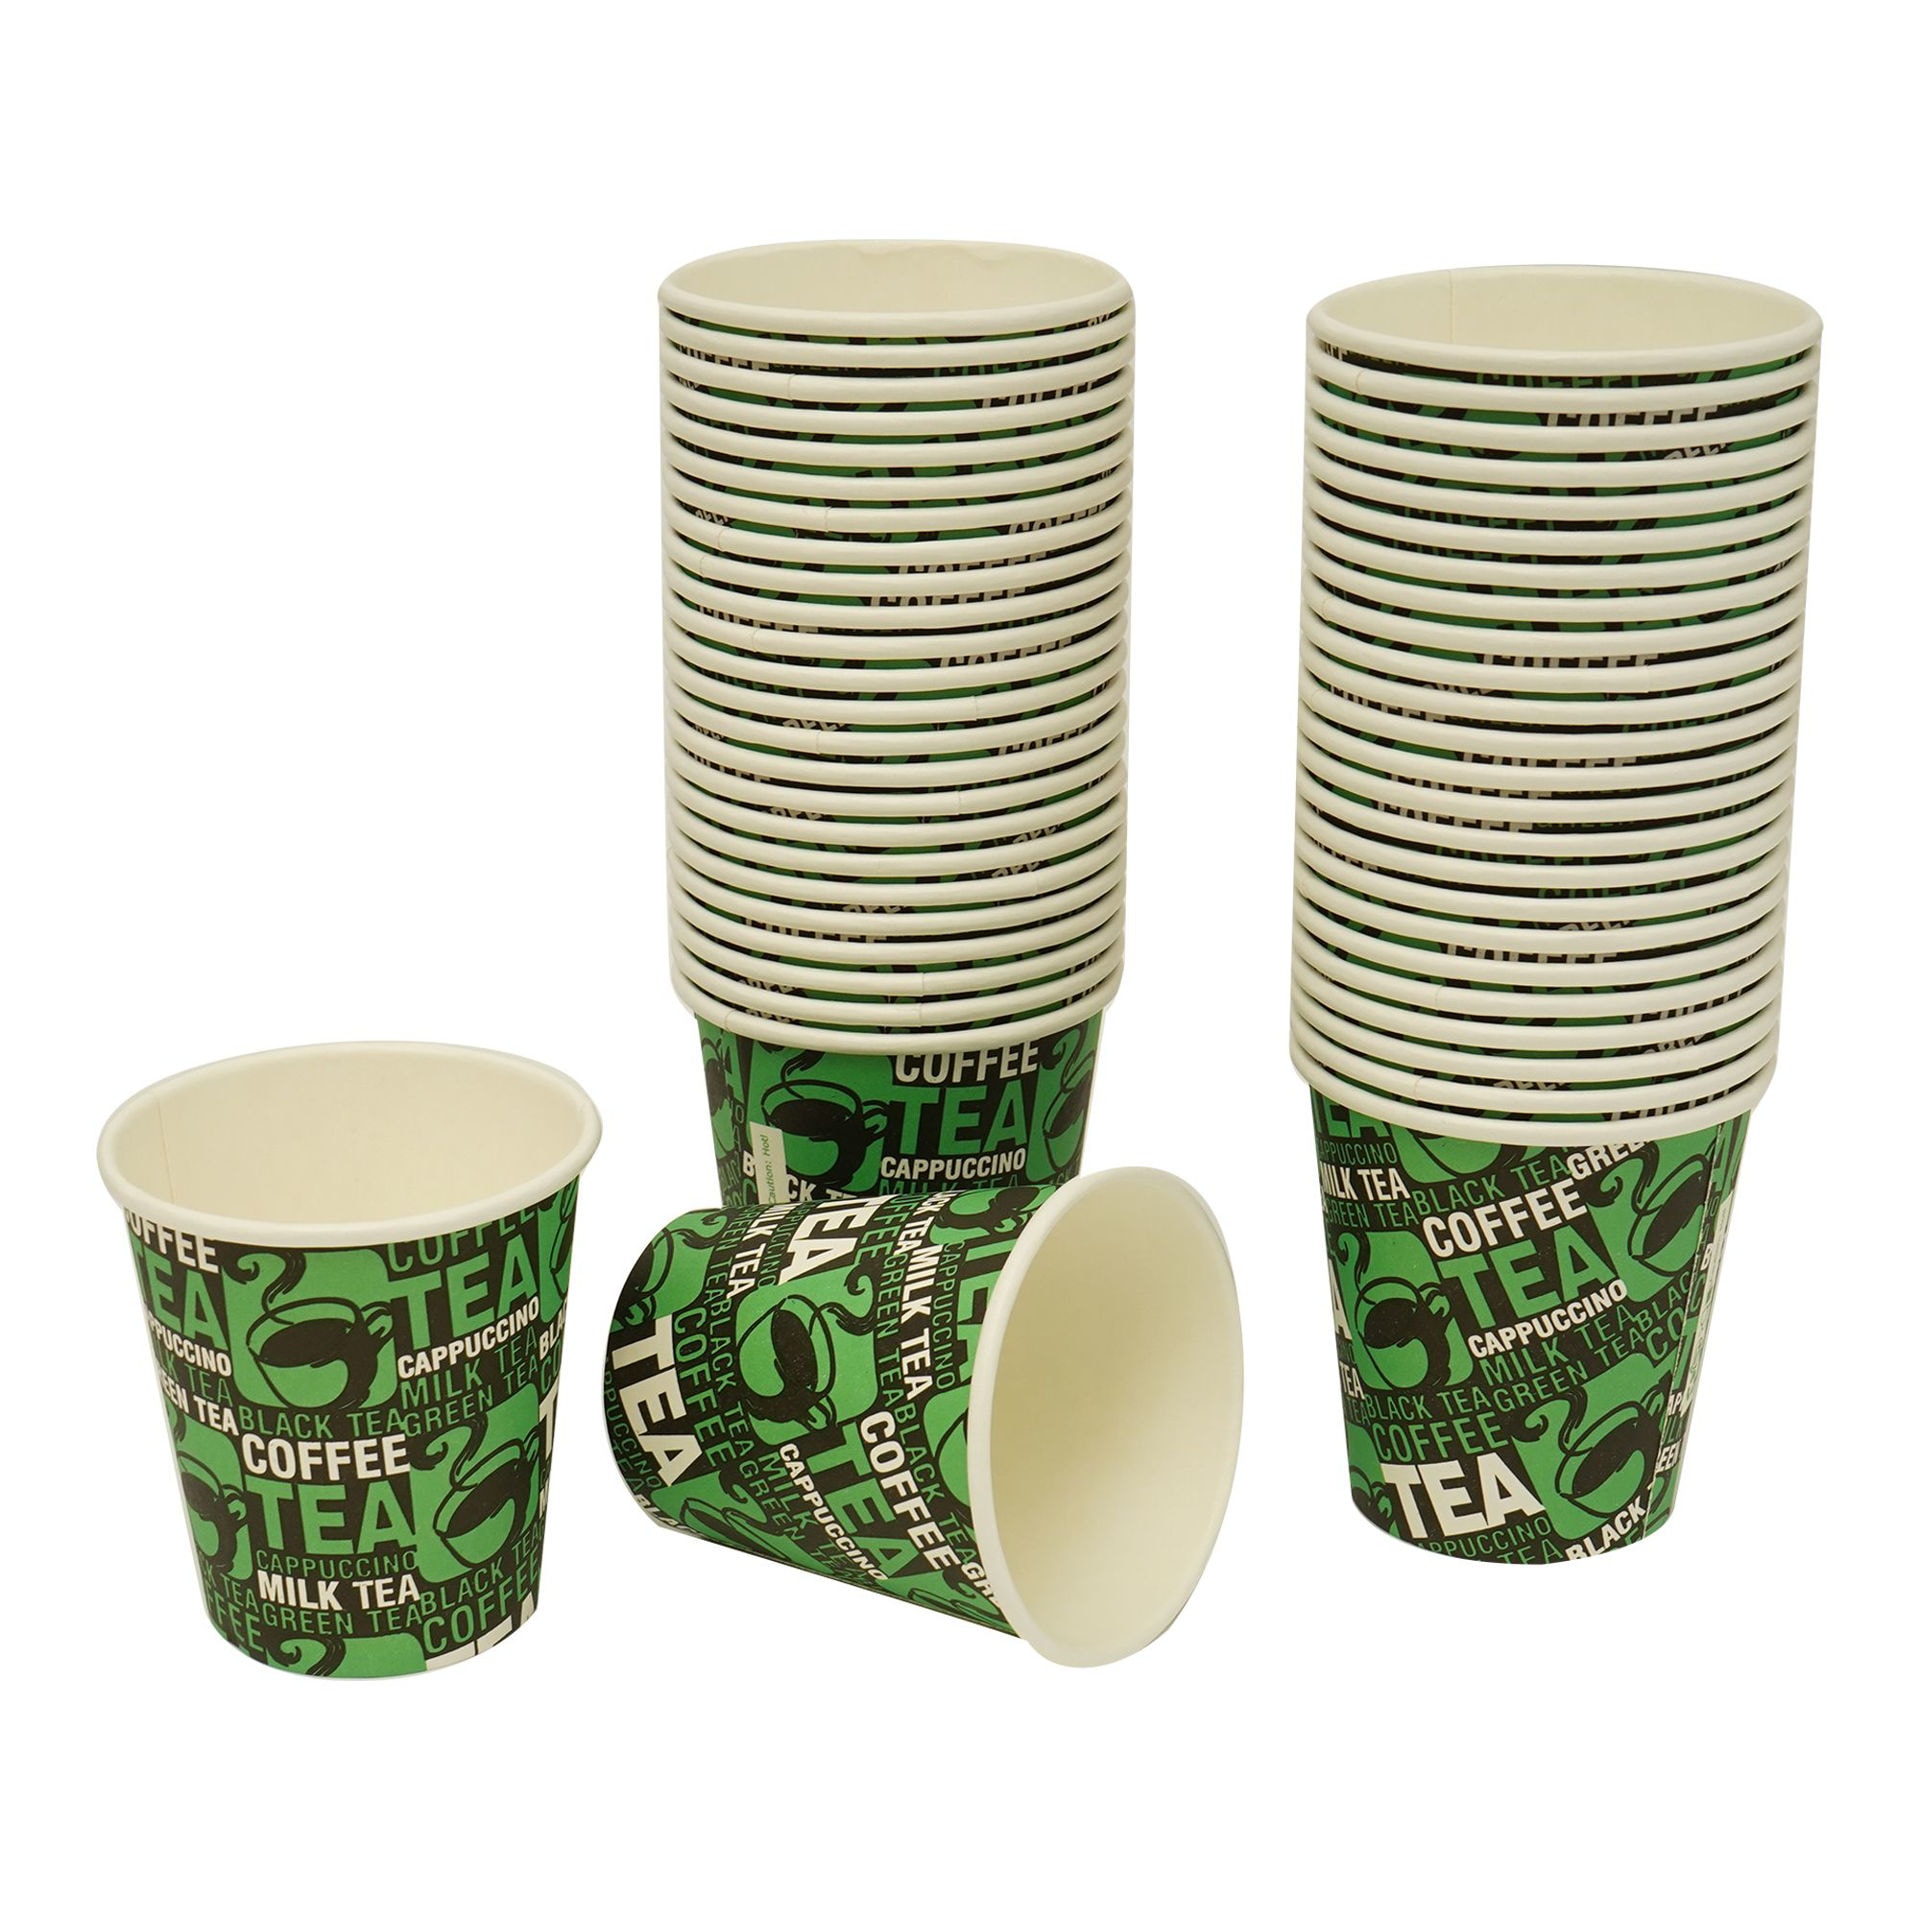 Shop IDEAL PACK Ideal Pack Paper Cup, 6.5oz, Pack of 50pcs, Green